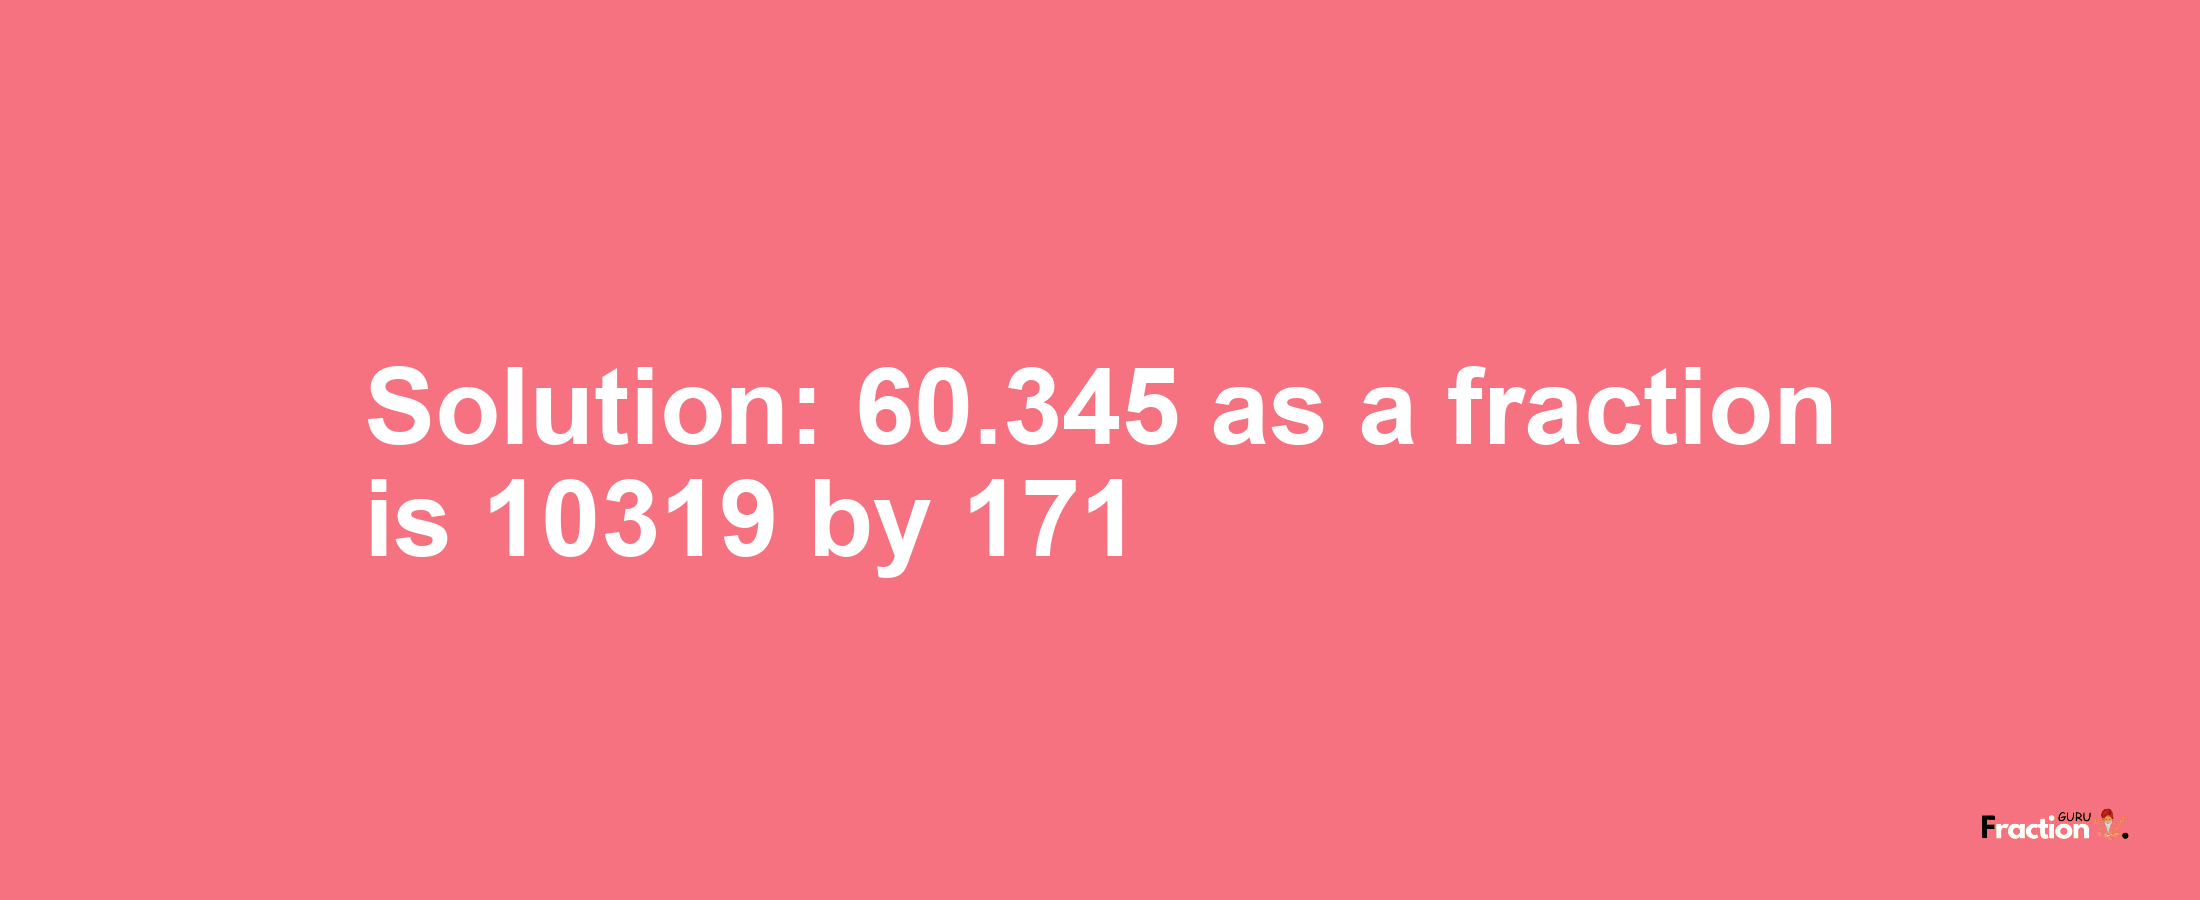 Solution:60.345 as a fraction is 10319/171